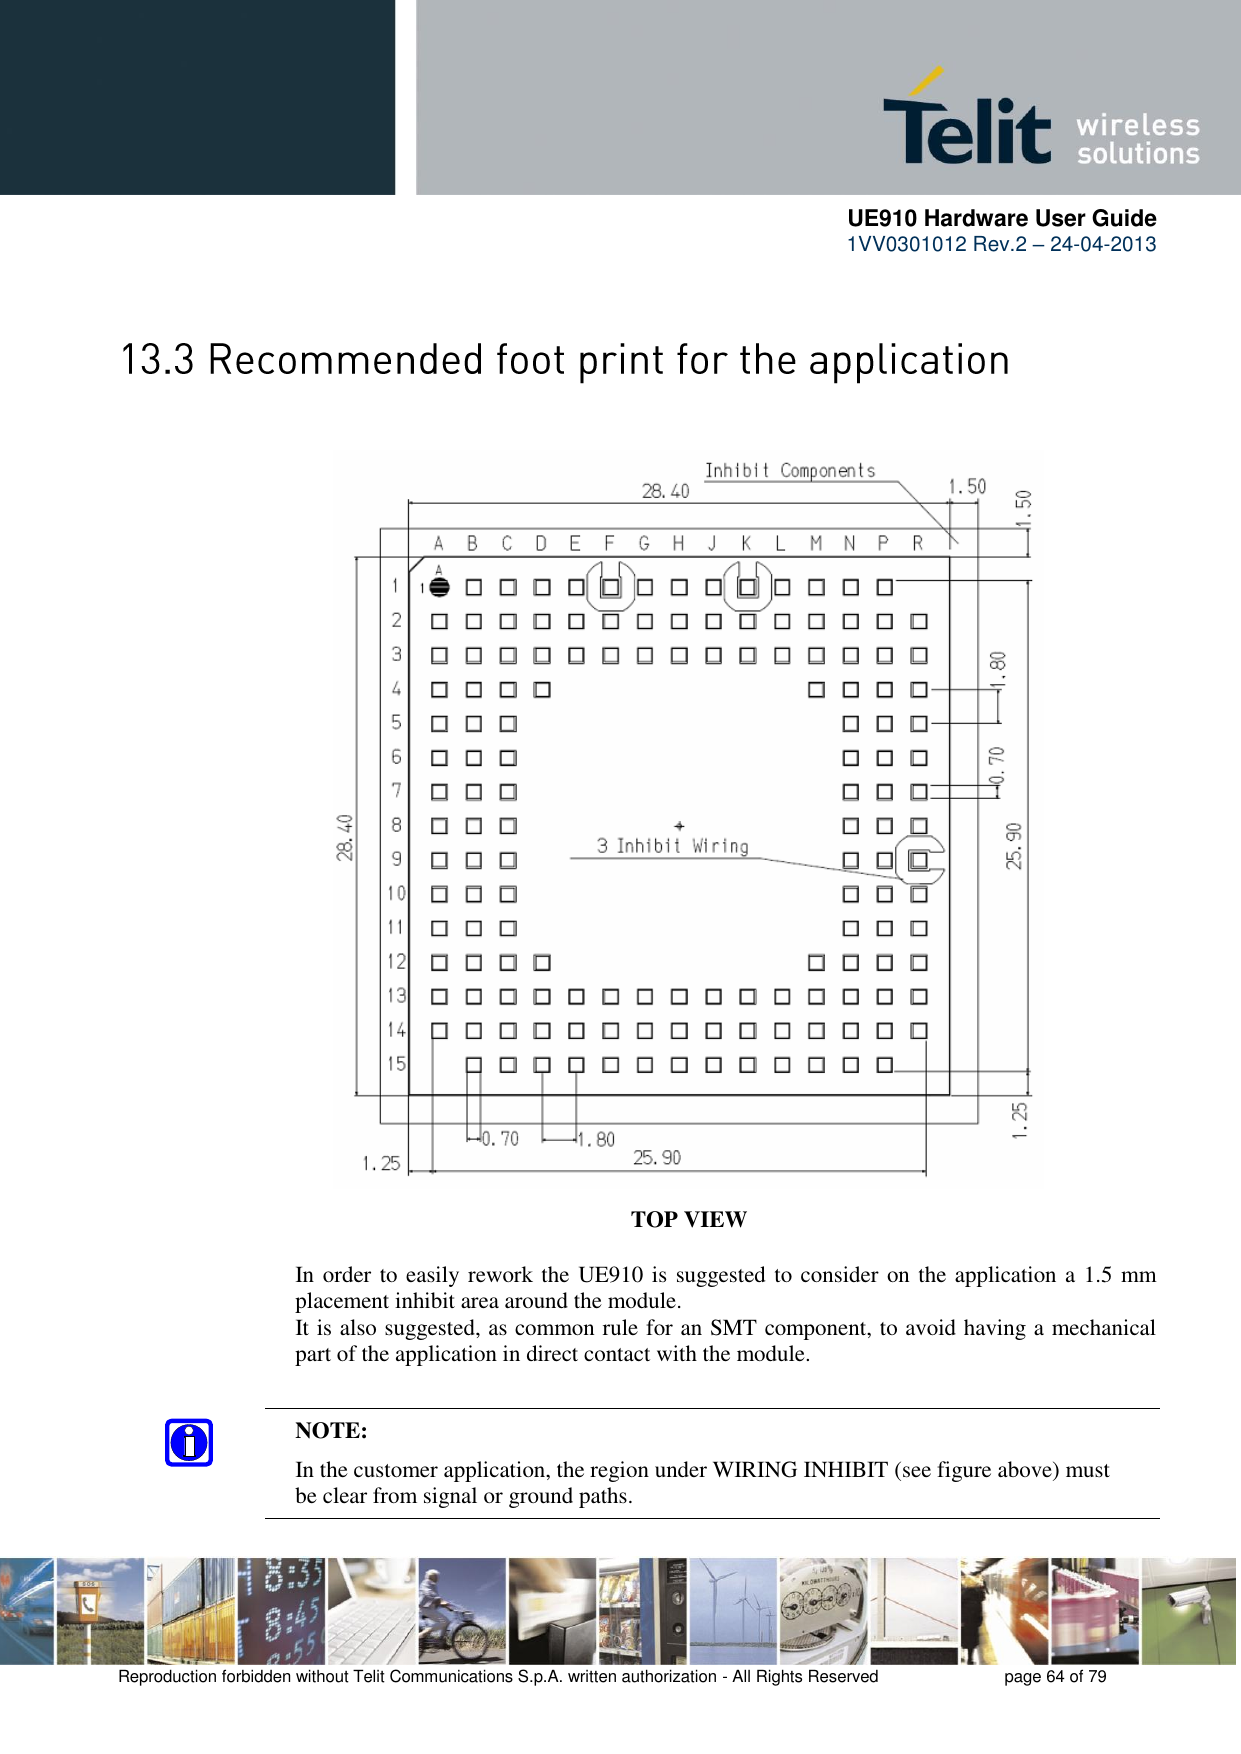      UE910 Hardware User Guide  1VV0301012 Rev.2 – 24-04-2013    Reproduction forbidden without Telit Communications S.p.A. written authorization - All Rights Reserved    page 64 of 79    TOP VIEW In order to easily rework the UE910 is suggested to consider on the application a 1.5 mm placement inhibit area around the module. It is also suggested, as common rule for an SMT component, to avoid having a mechanical part of the application in direct contact with the module. NOTE:   In the customer application, the region under WIRING INHIBIT (see figure above) must   be clear from signal or ground paths.  